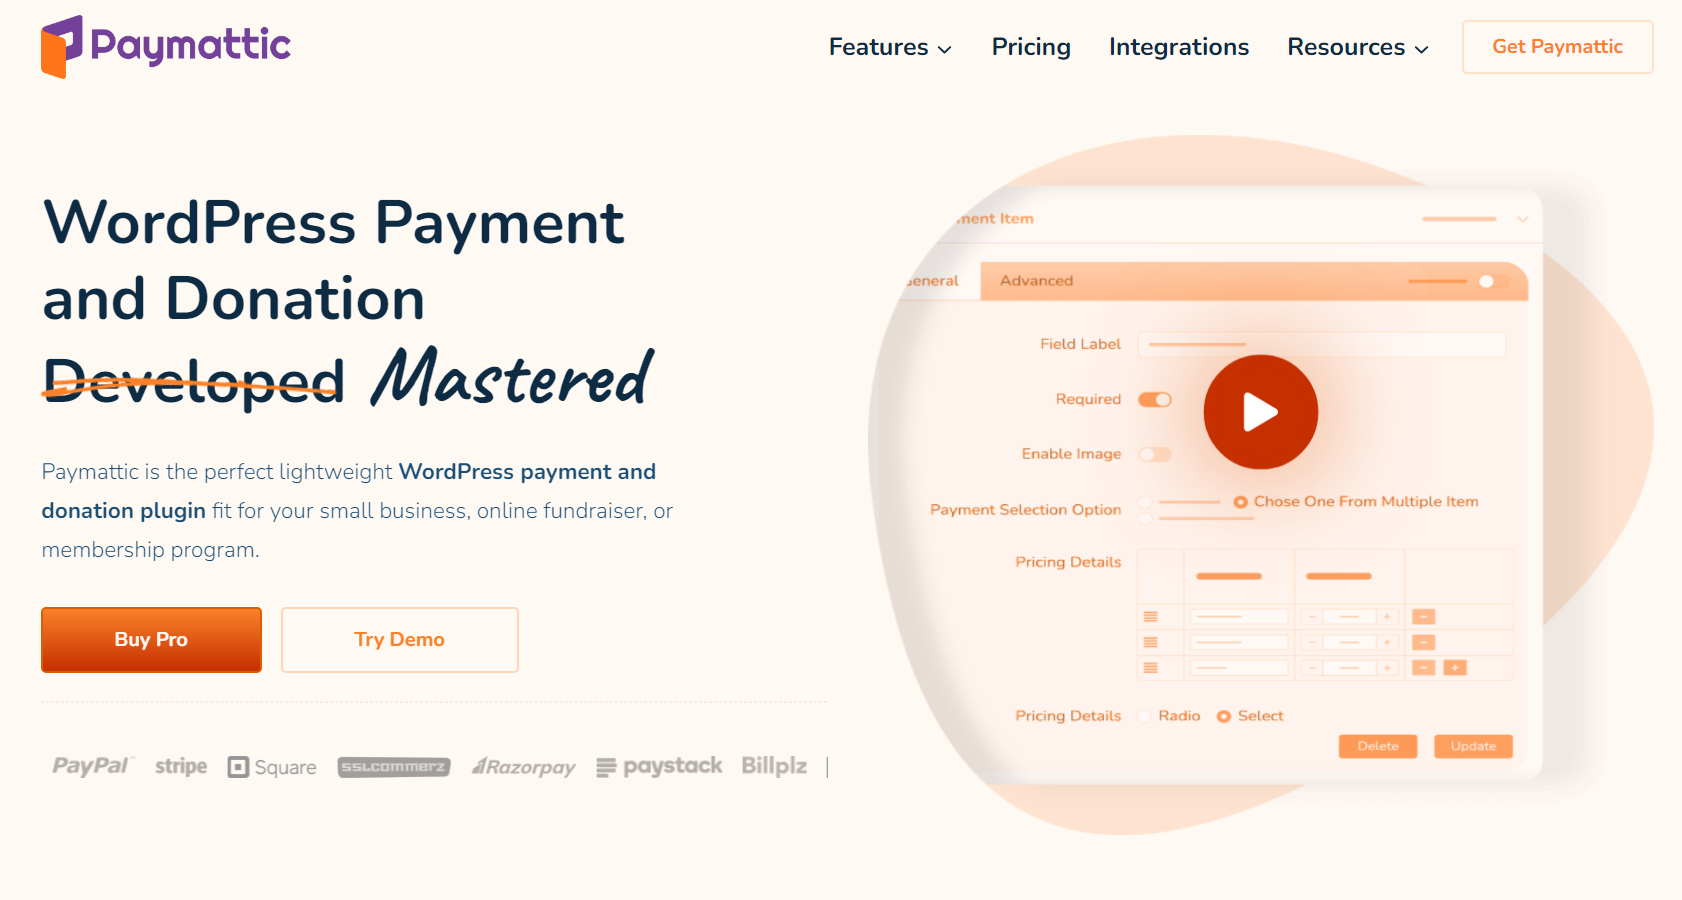 WPPayForm Pro – WordPress Payments Made Simple - Paymattic Pro - WordPress Payment and Donation v4.5.0 by Paymattic Nulled Free Download